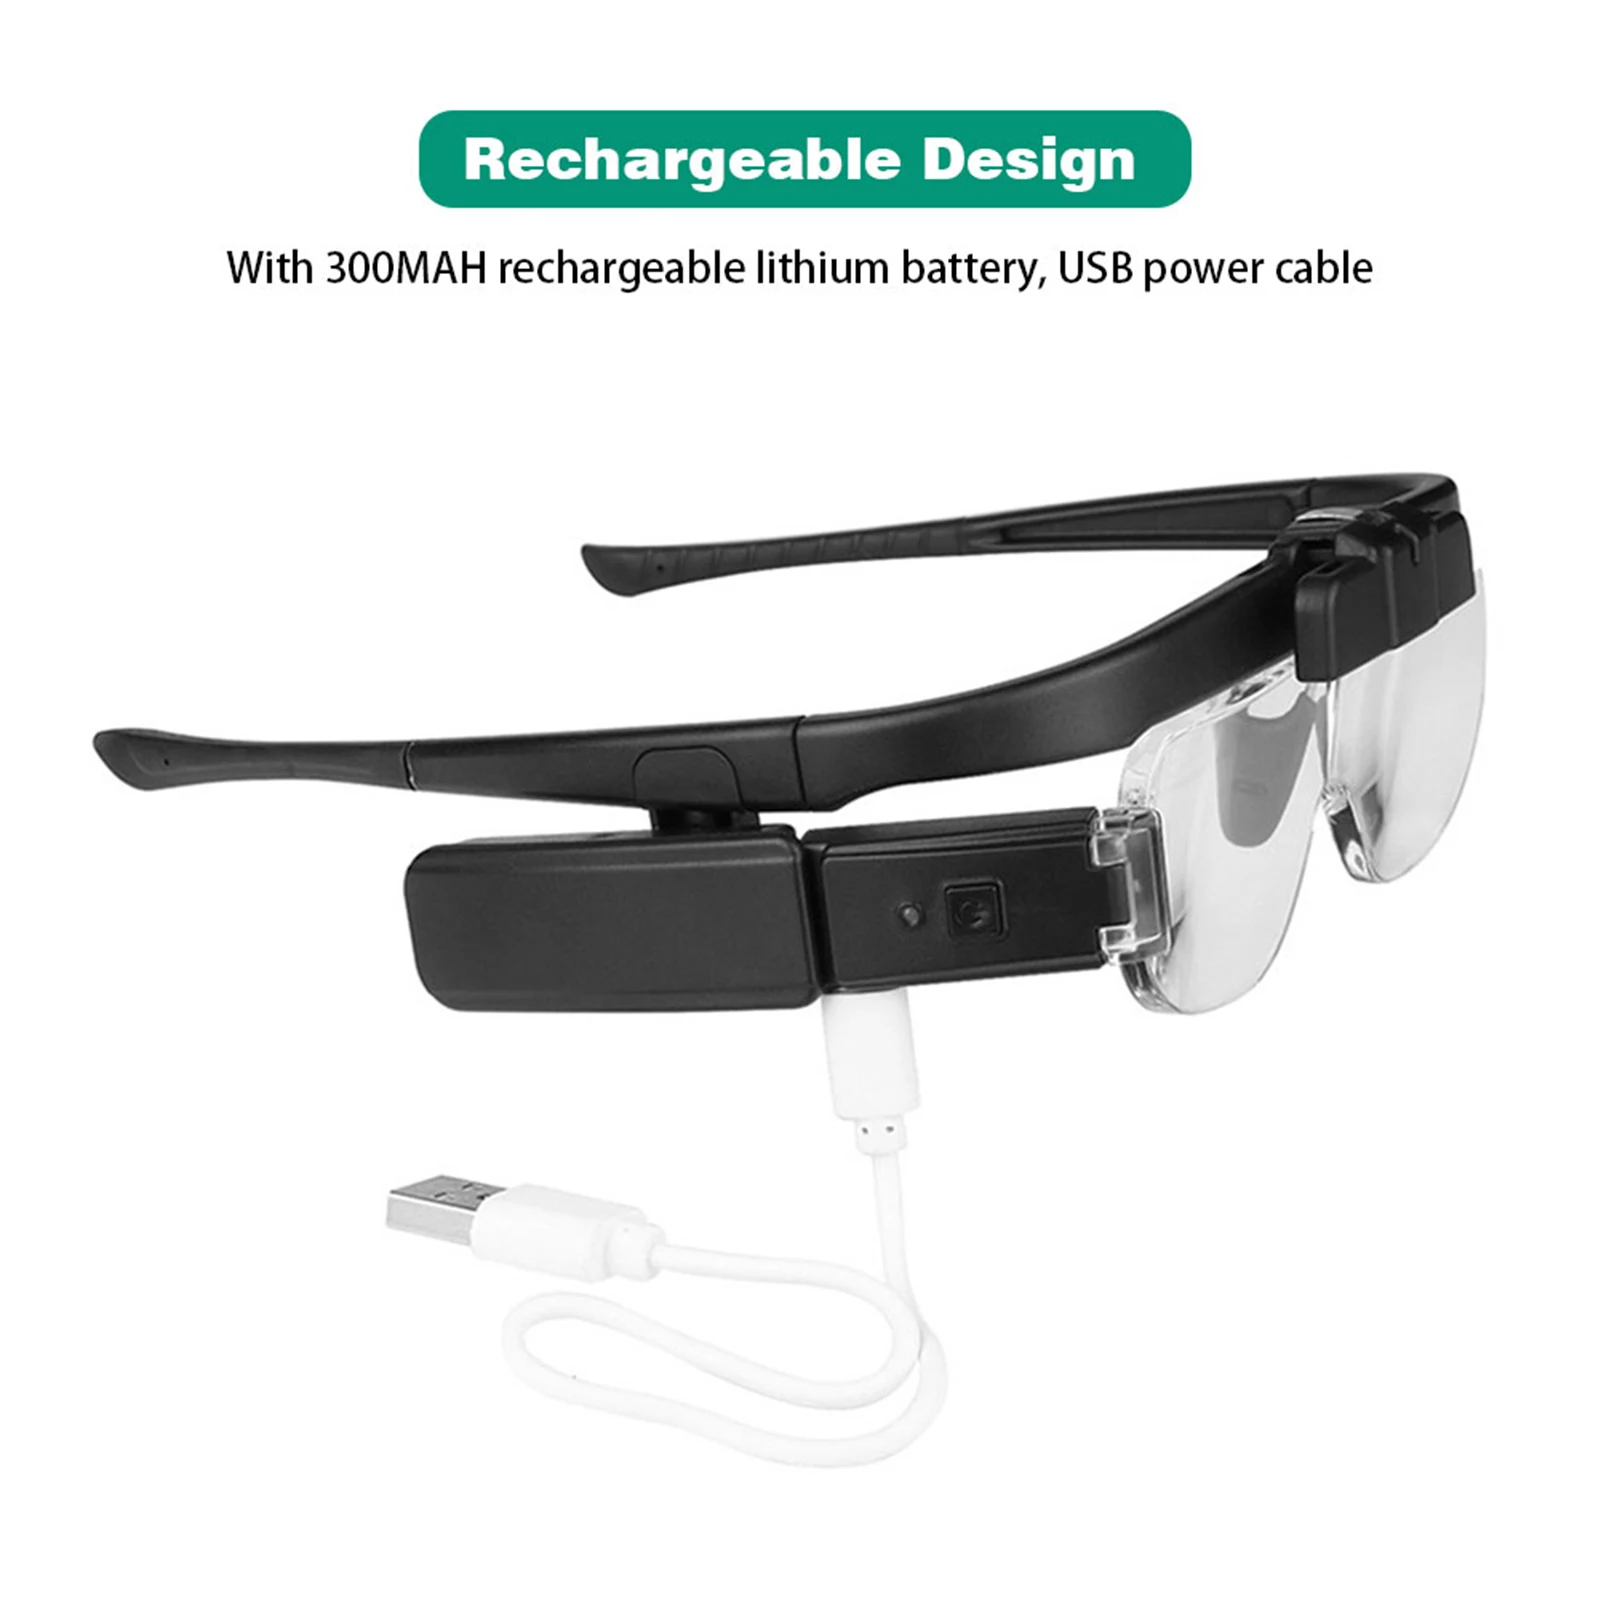 Head Magnifier Glasses with 2 LED Lights USB Charging Magnifying Eyeglasses  for Reading Jewelry Craft Watch